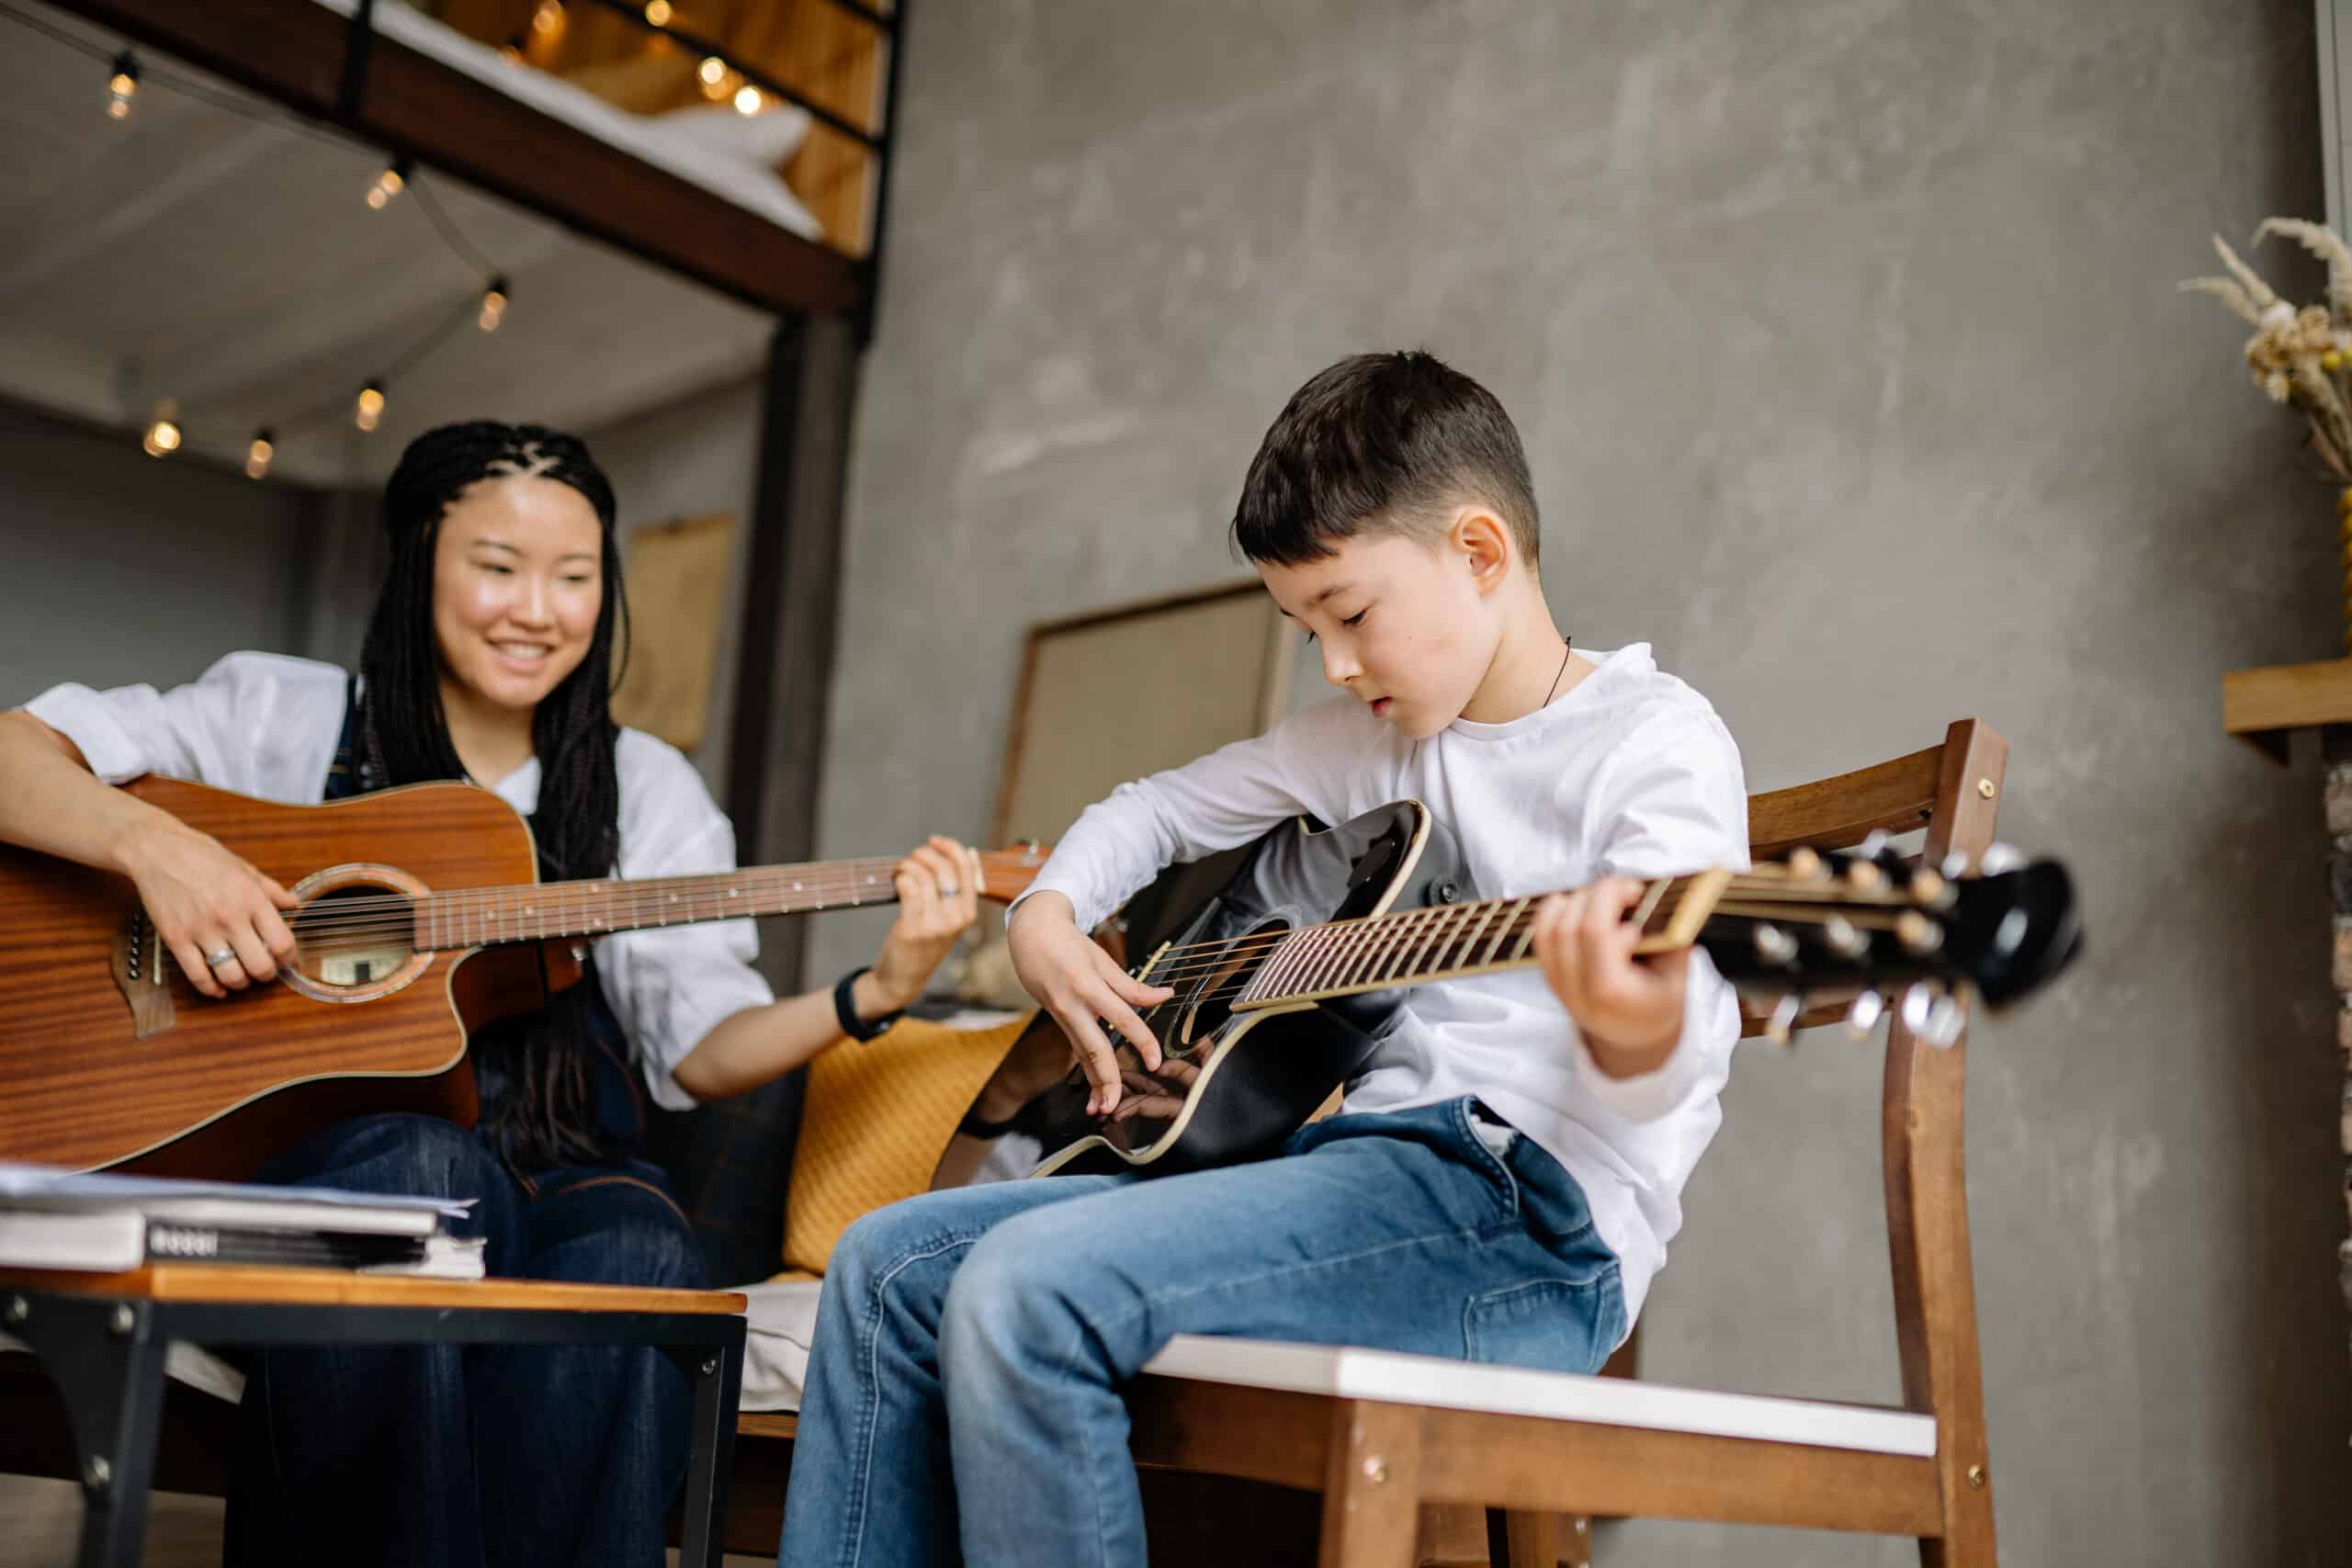 Kid and a woman playing guitars together